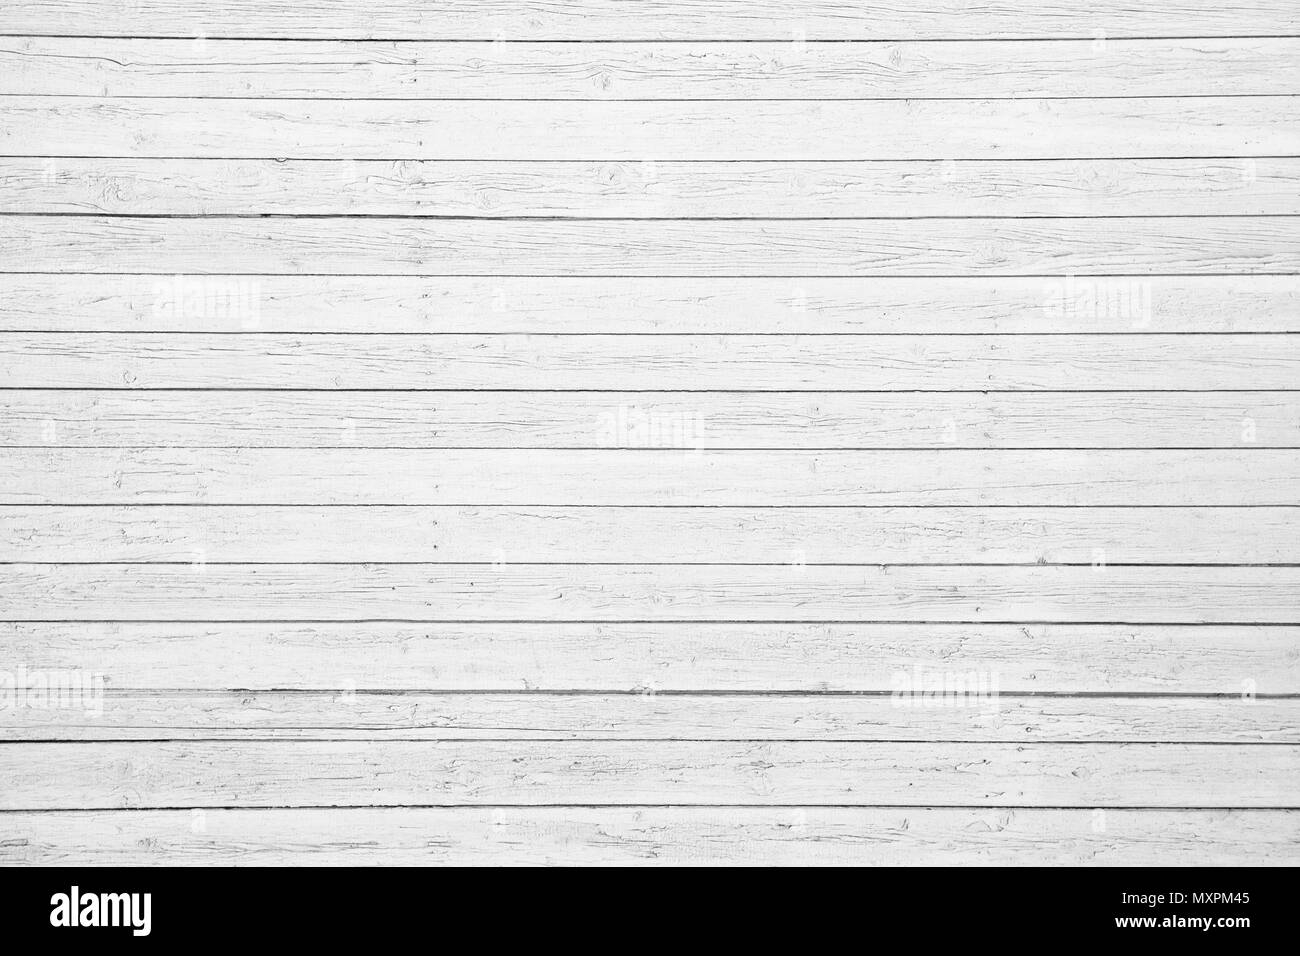 Wooden wall with horizontal planks. Close up of an old wooden fence panels Stock Photo